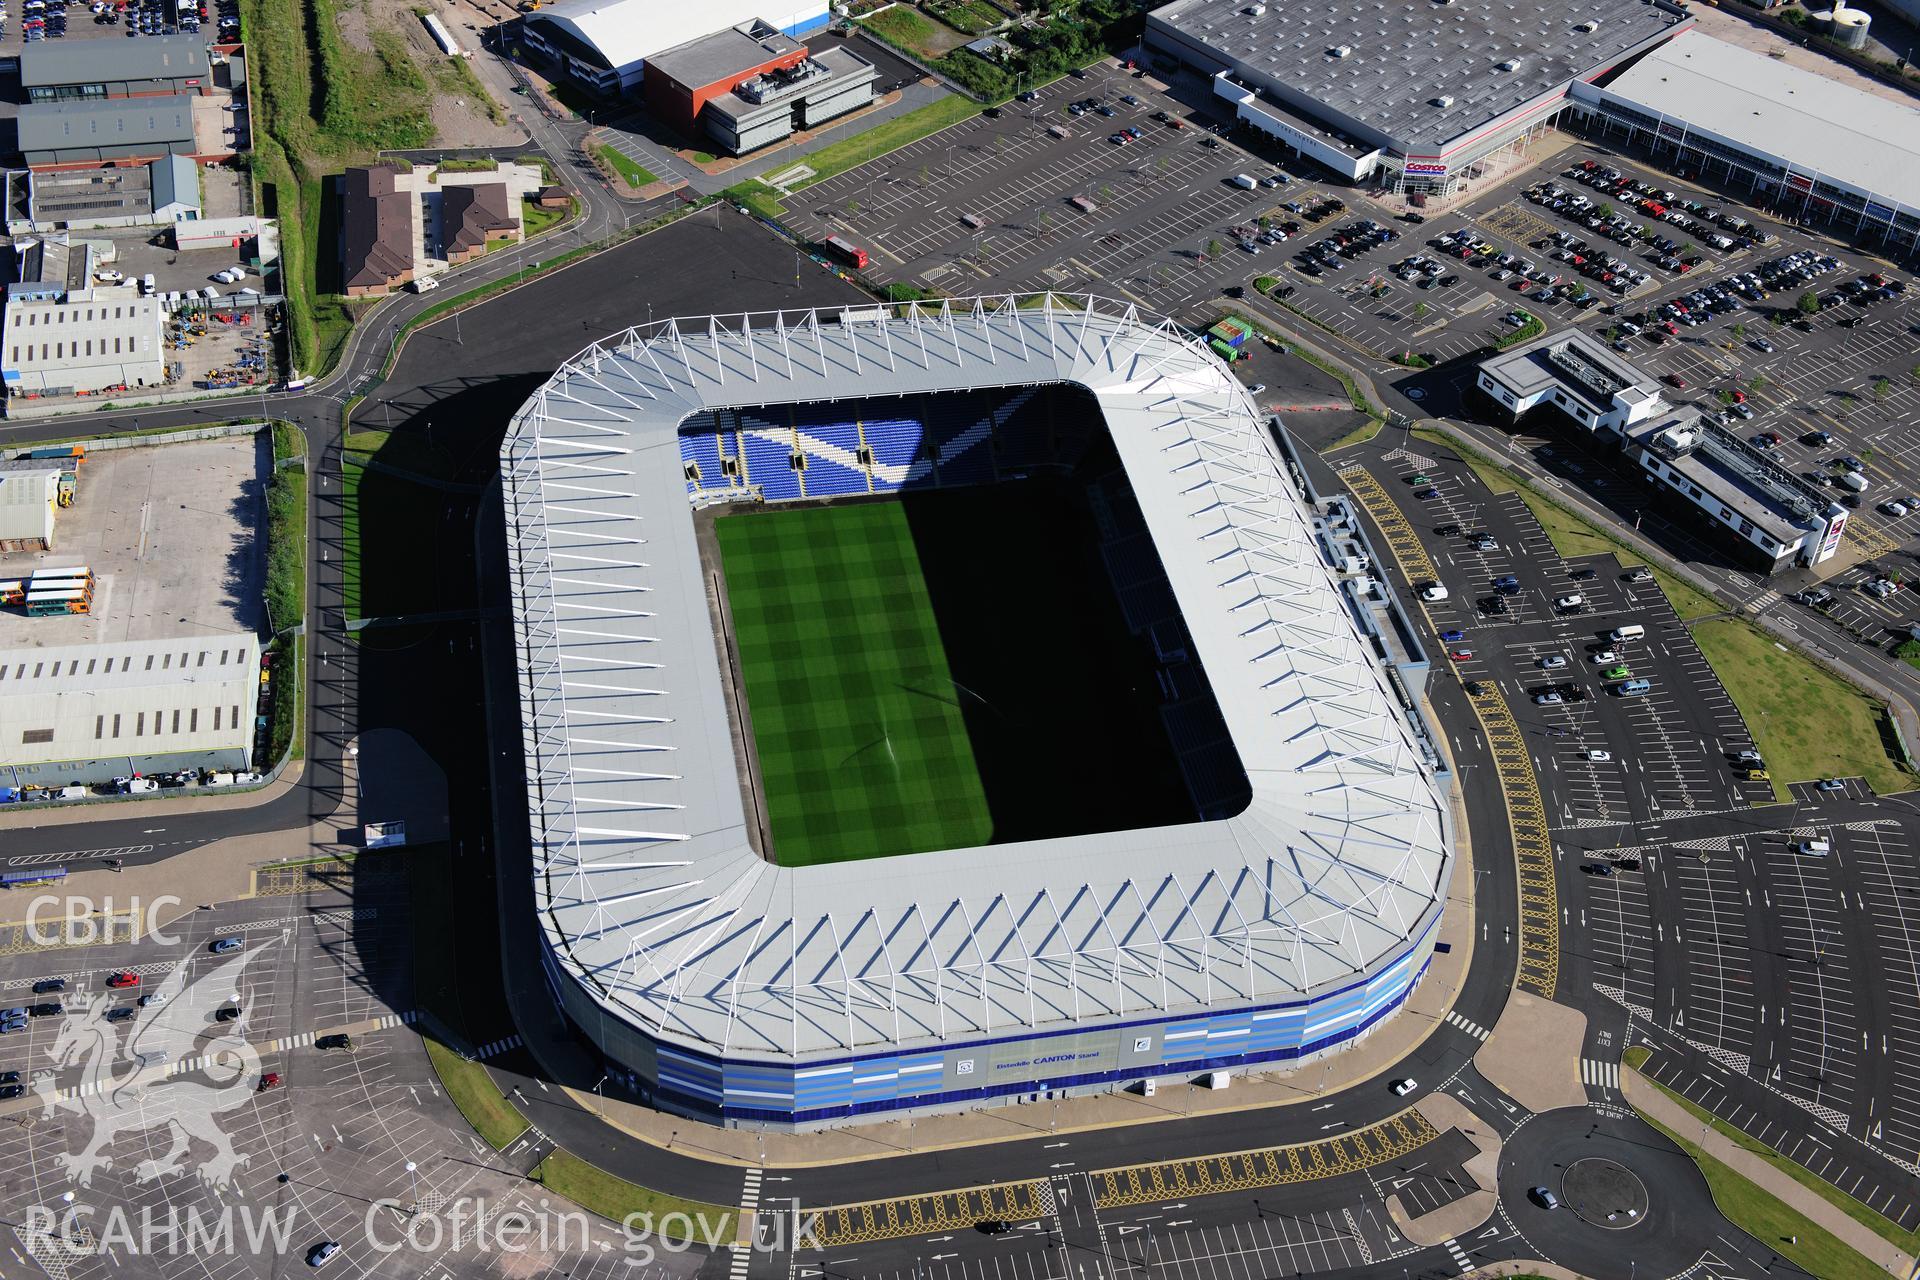 RCAHMW colour oblique photograph of Cardiff City Stadium. Taken by Toby Driver on 24/07/2012.